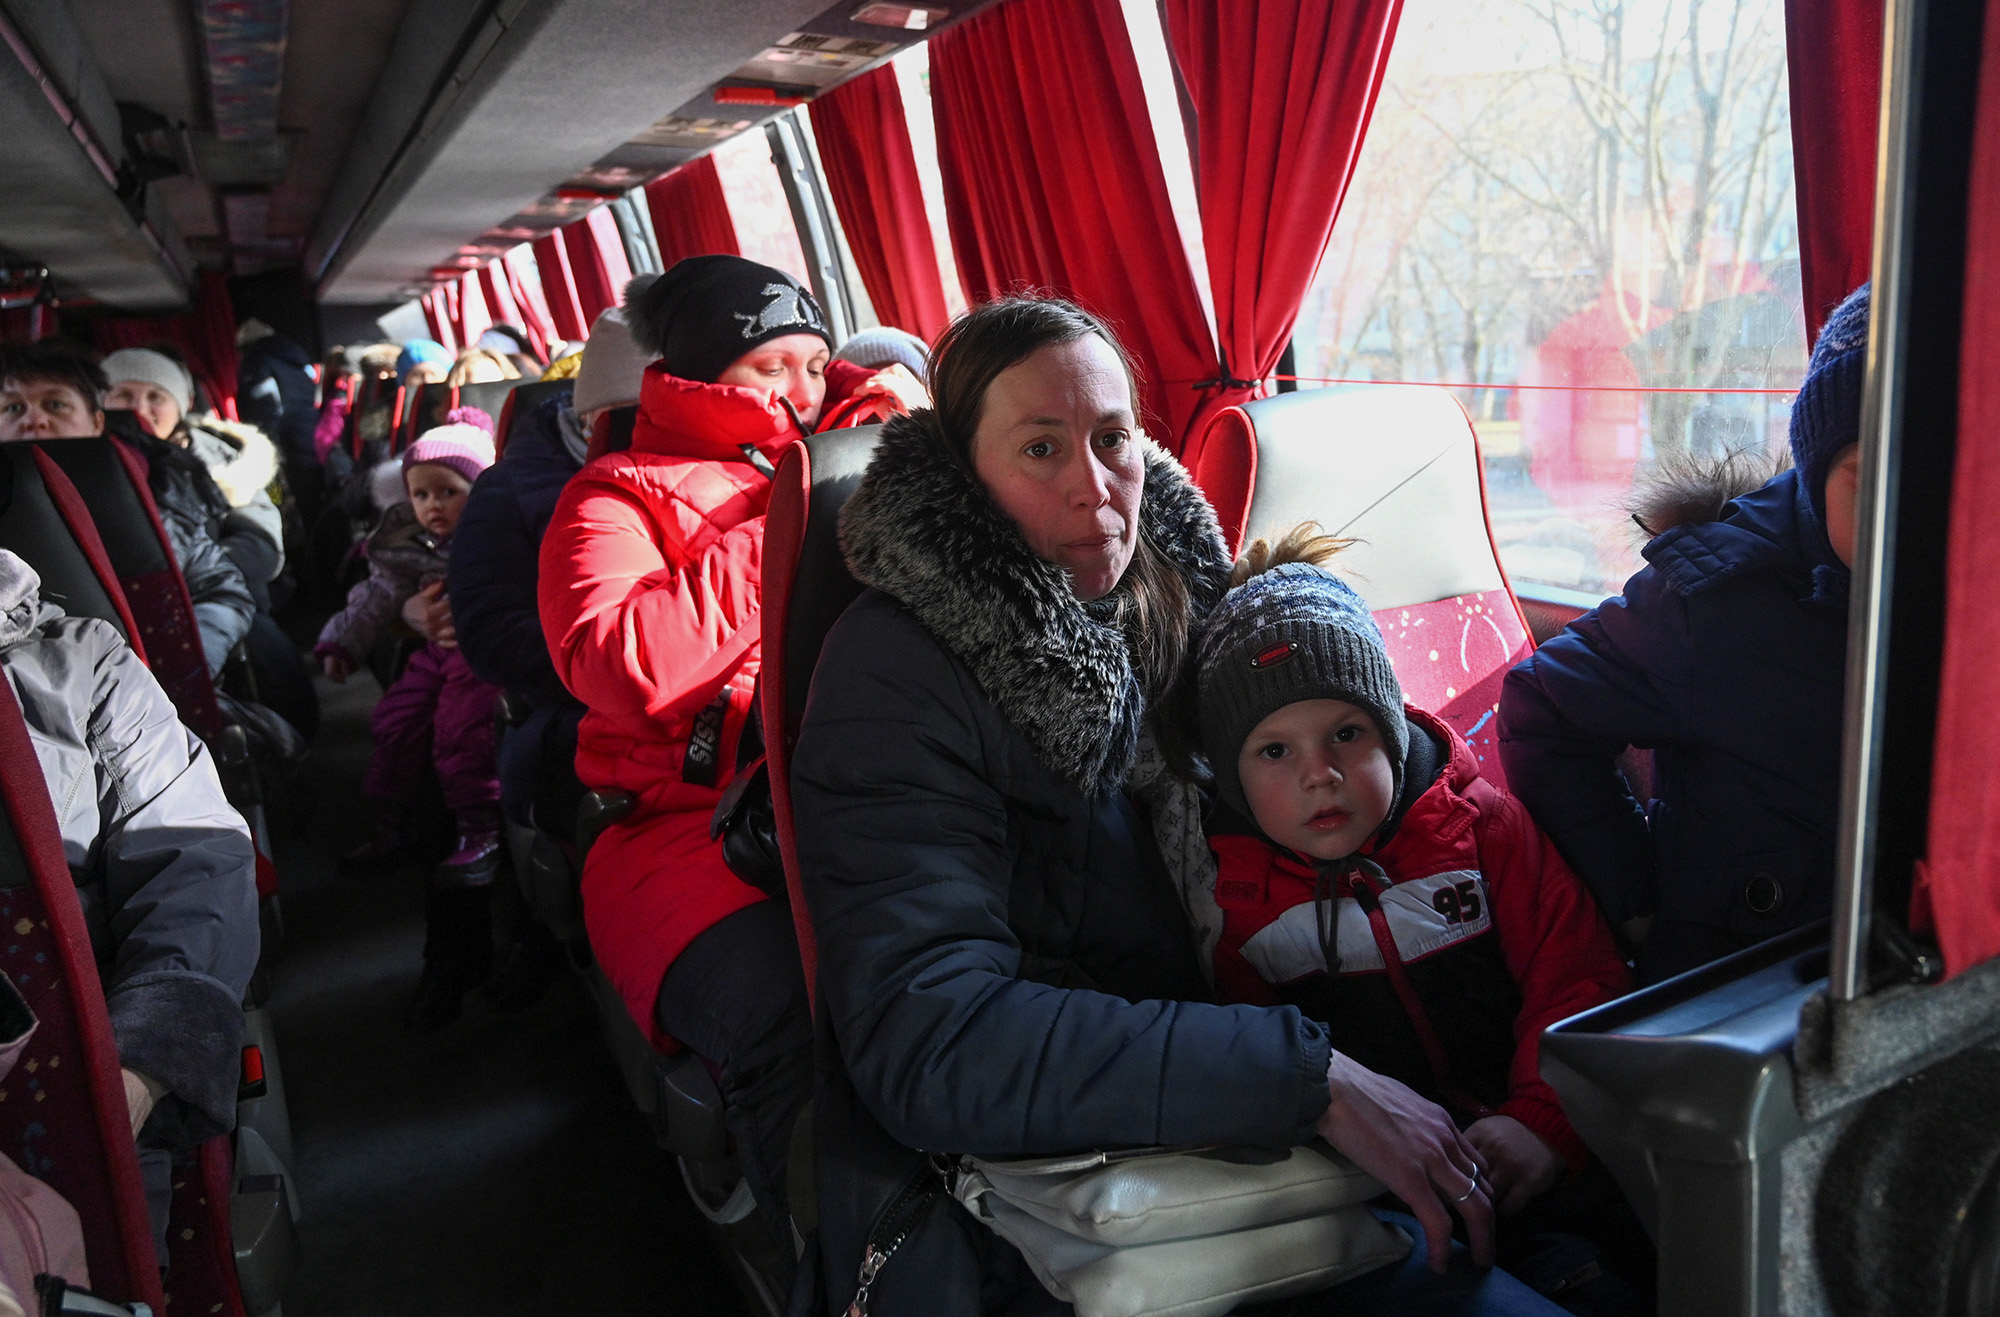 Ukrainians who have been evacuated from separatist-controlled regions in eastern Ukraine sit in a bus as they arrive at a railway station in the Rostov region, Russia, on February 20.